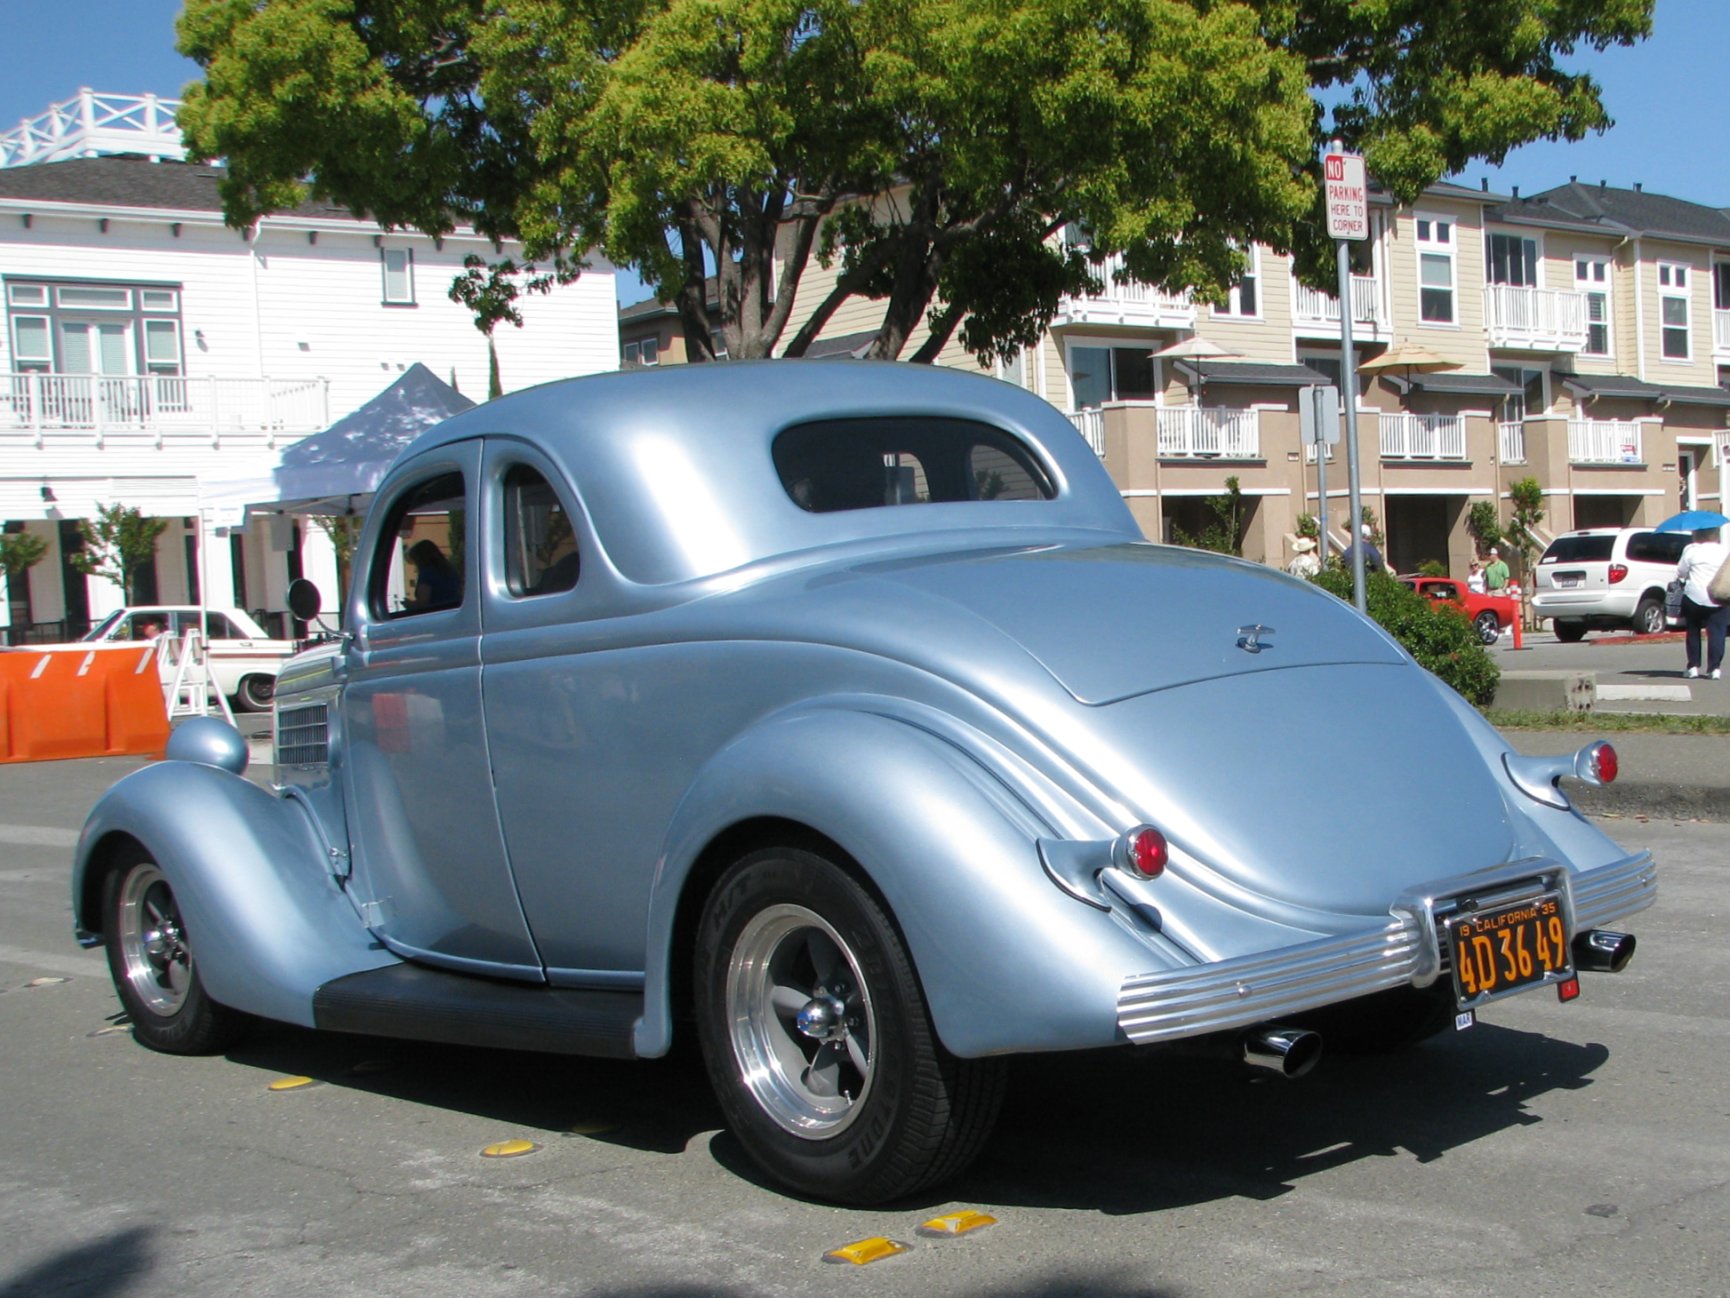 1935 Ford 5 Window Coupe (Custom) '4D 36 49' 5 | Flickr - Photo ...